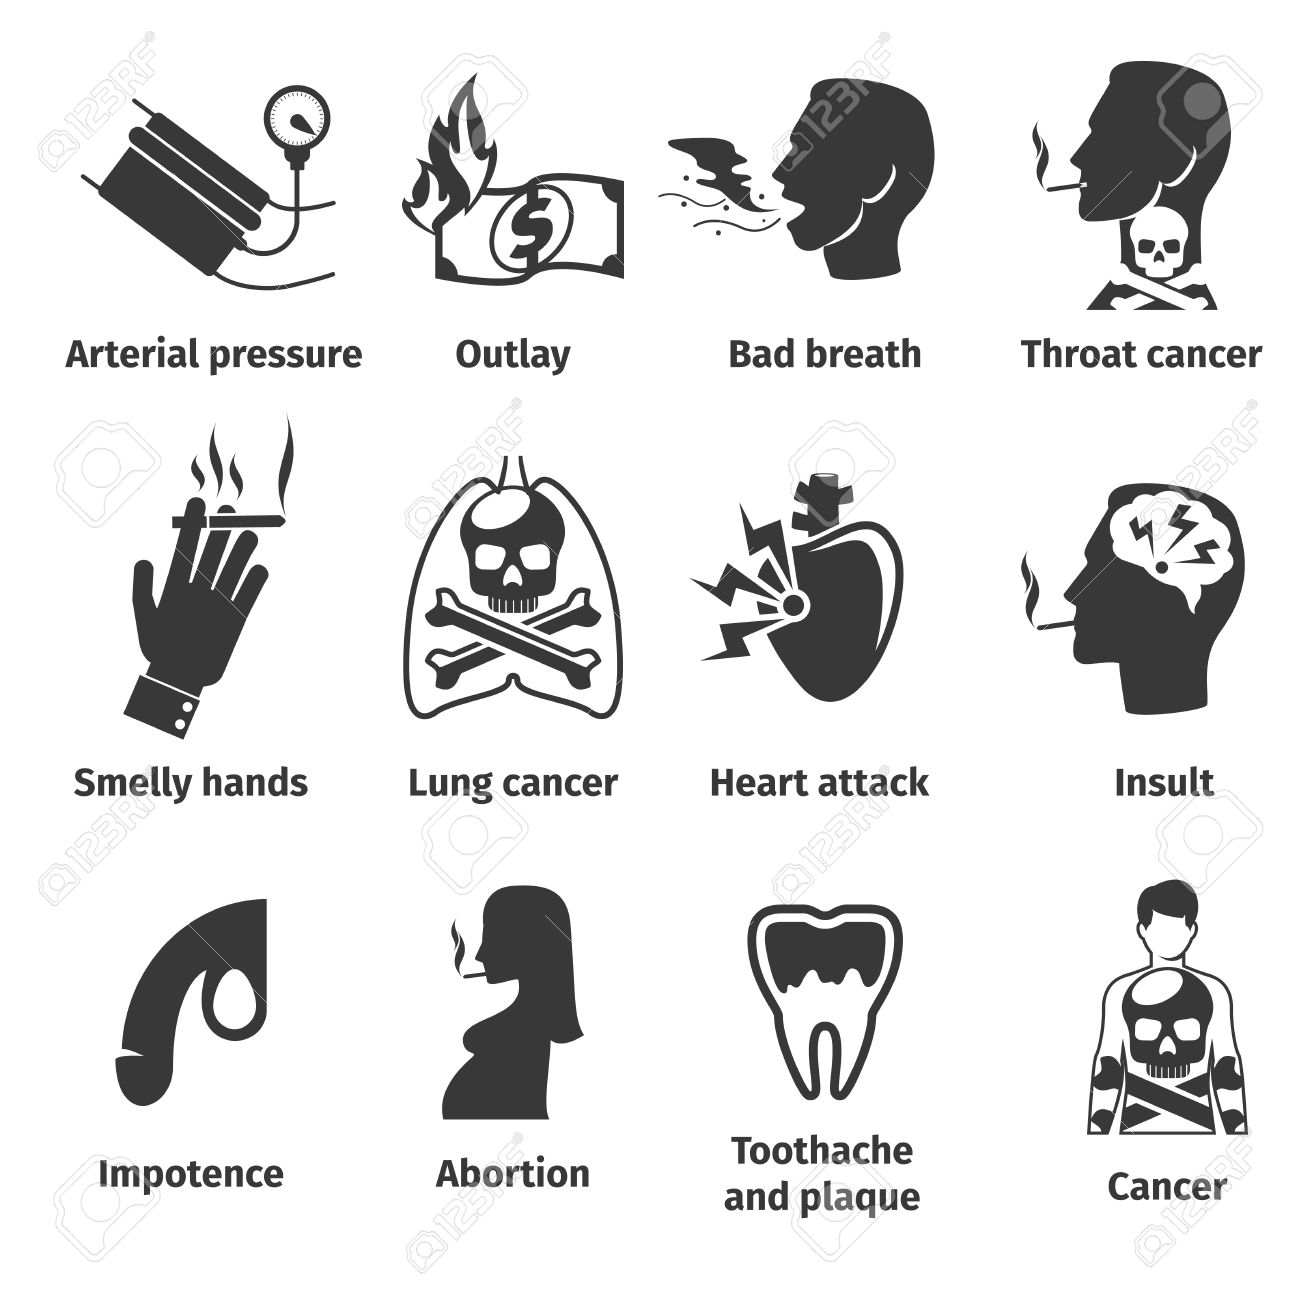 50194066-Dangers-of-smoking-icons-Toothache-and-plaque-abortion-and-impotence-insult-and-attack-heart-hand-sm-Stock-Vector.jpg